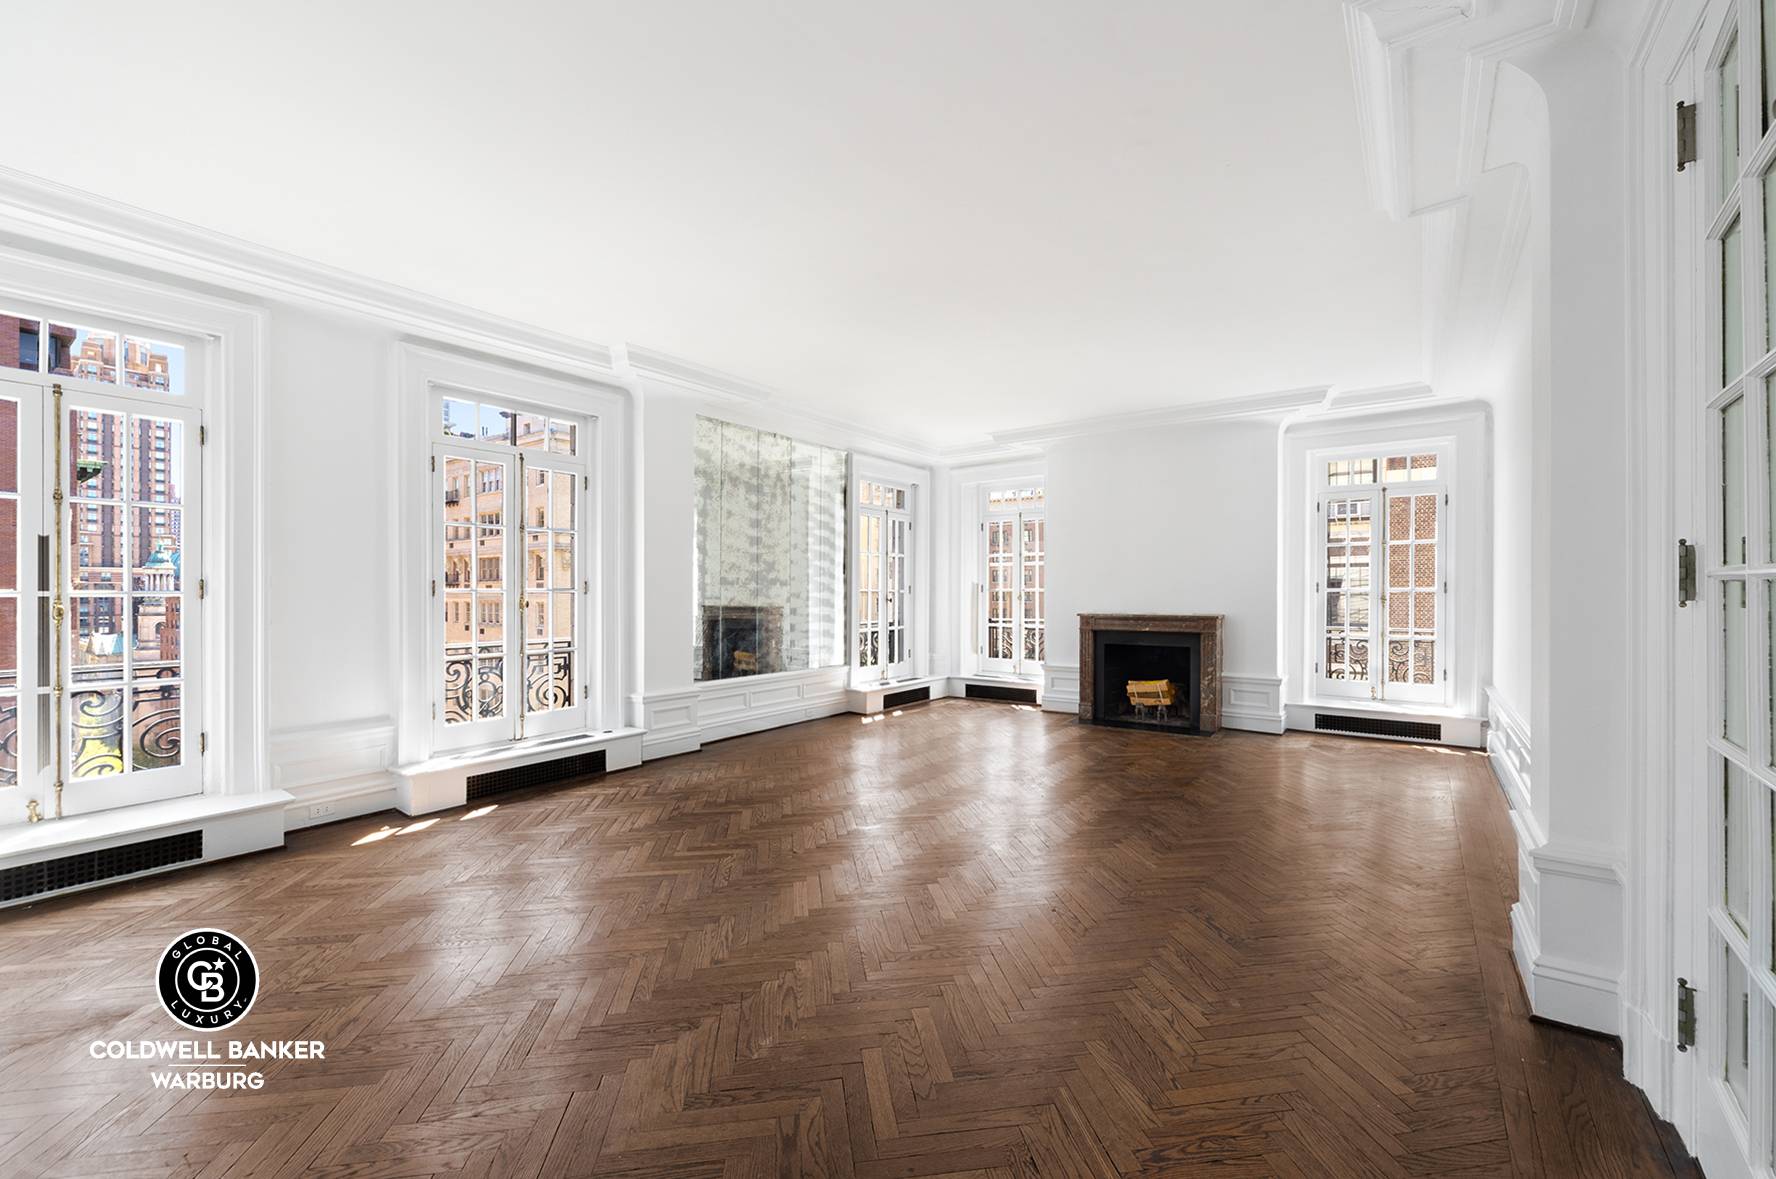 Once In A Lifetime First offering of this soaring and exquisite 4 BR and library duplex high up in a perfect Park Avenue location.